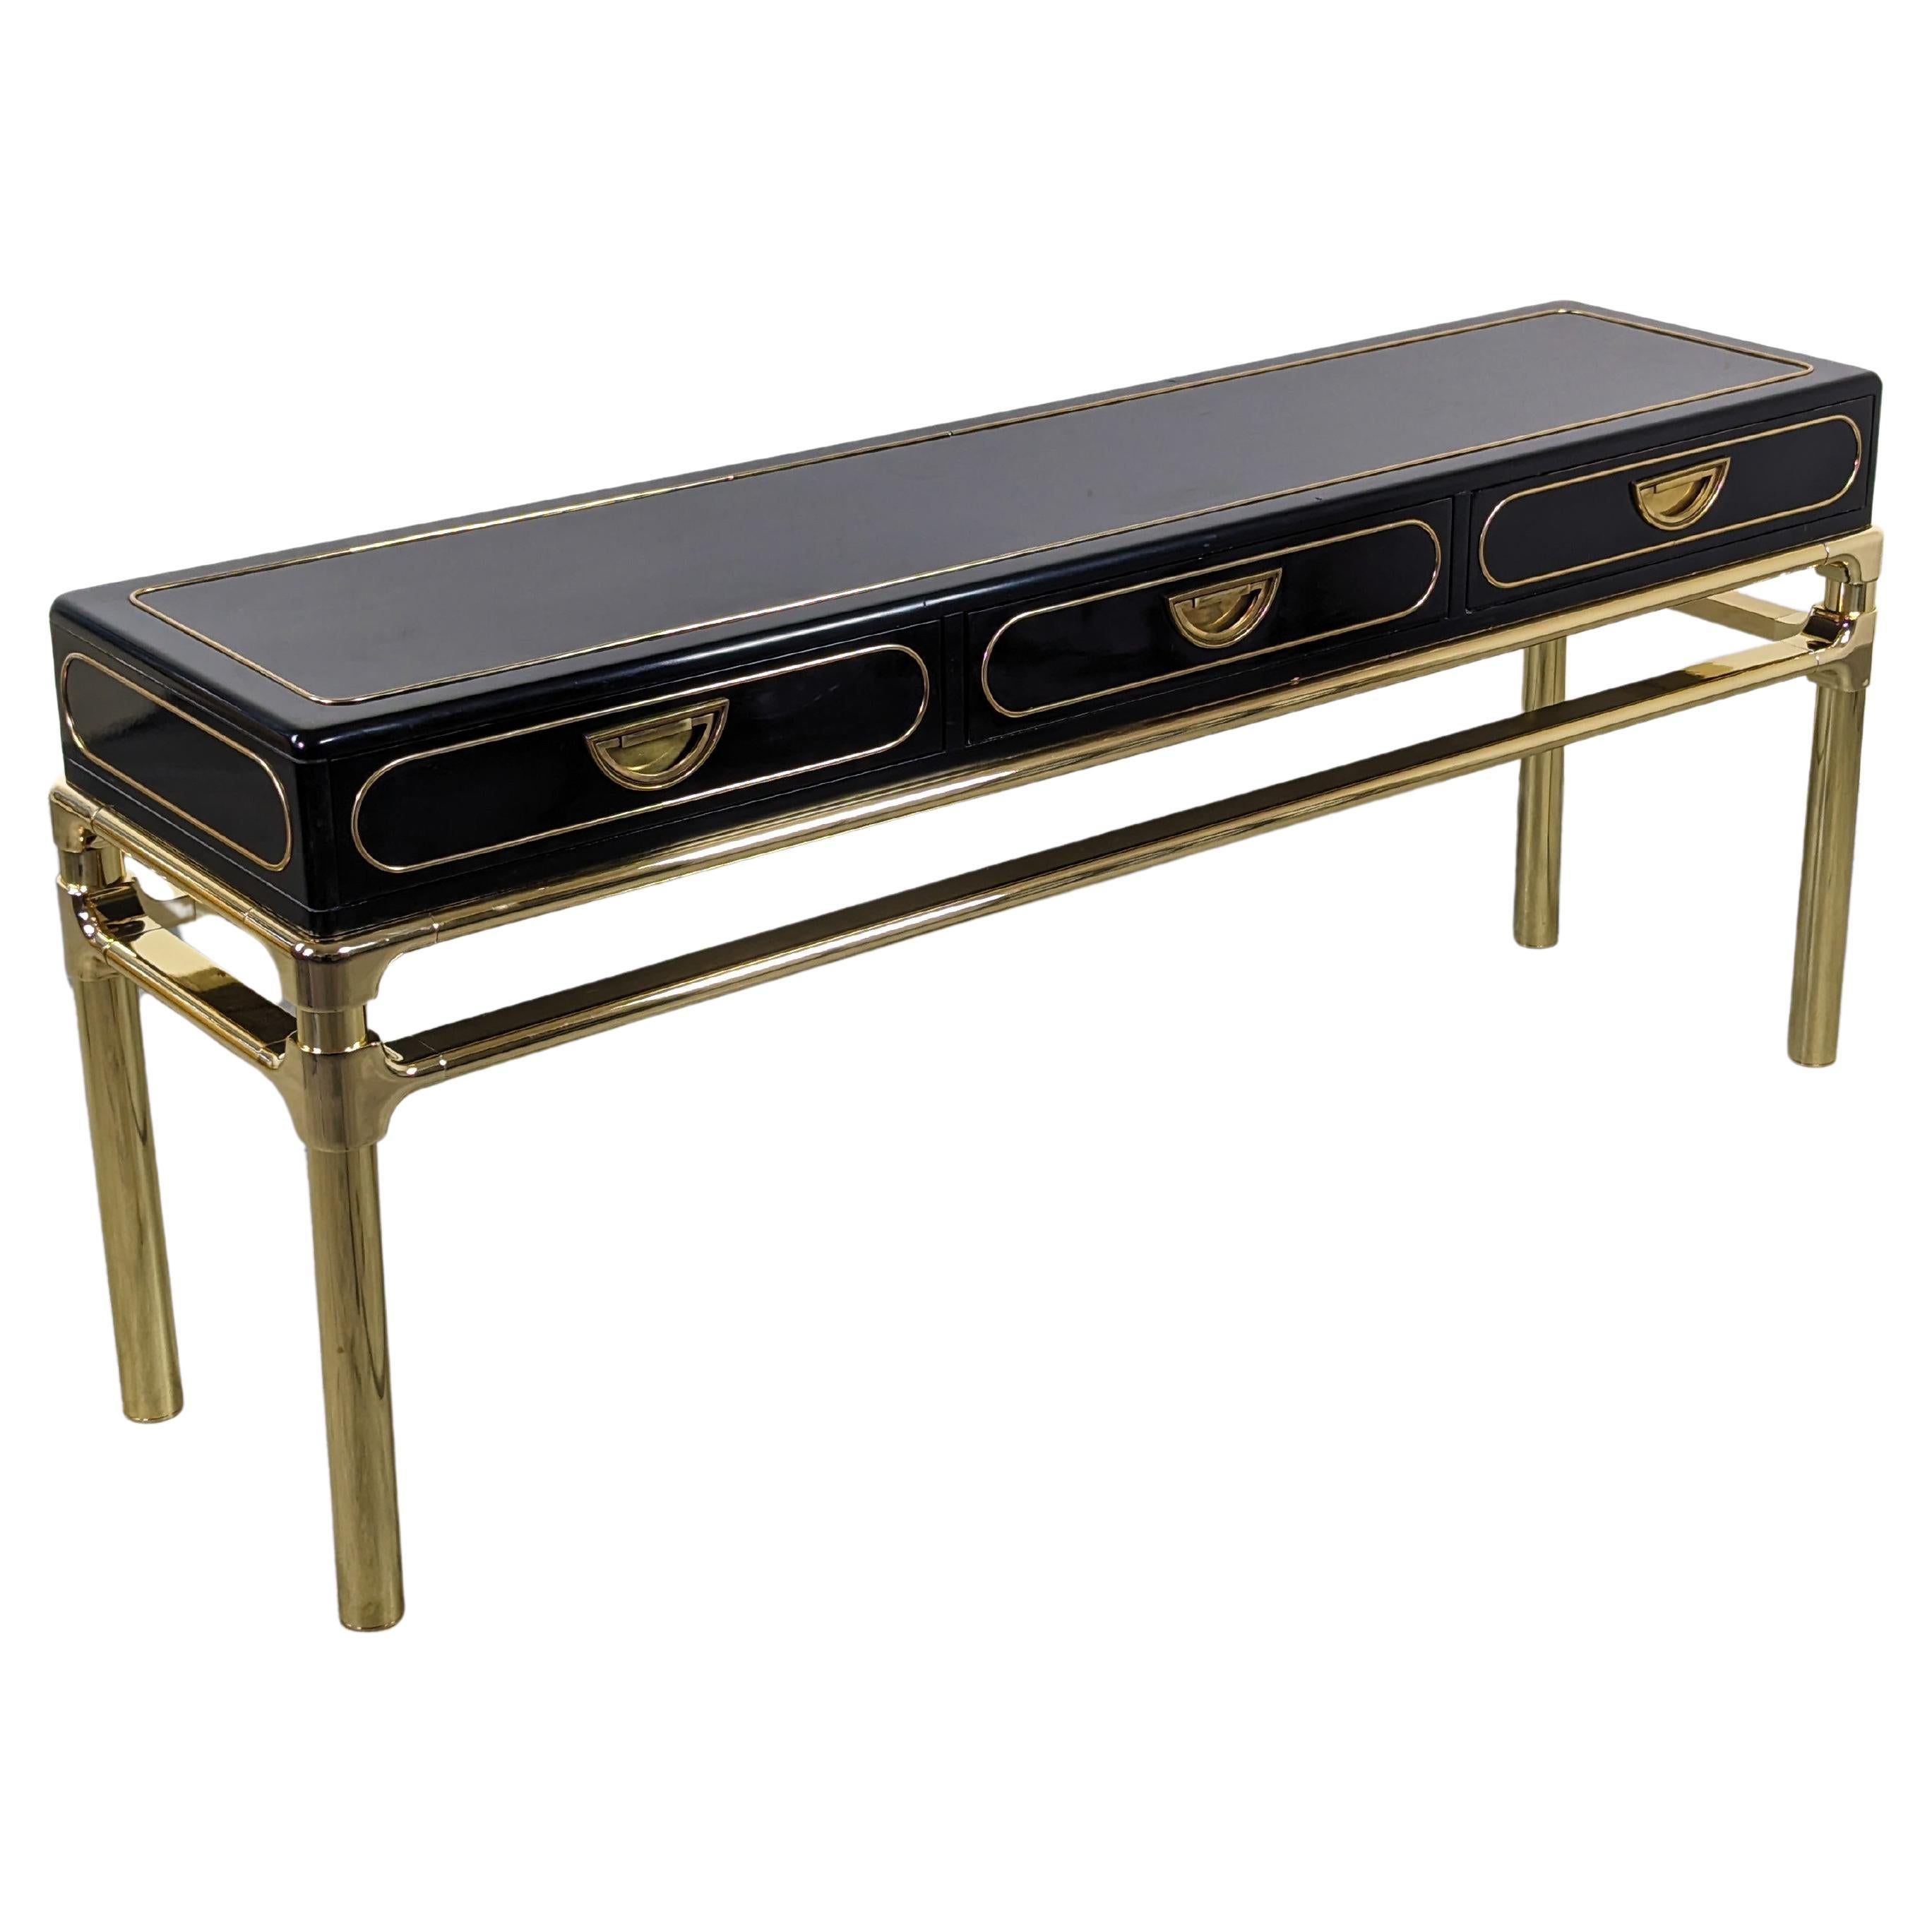 Brass and Black Lacquer Console Table With Drawers by Mastercraft, c1970s